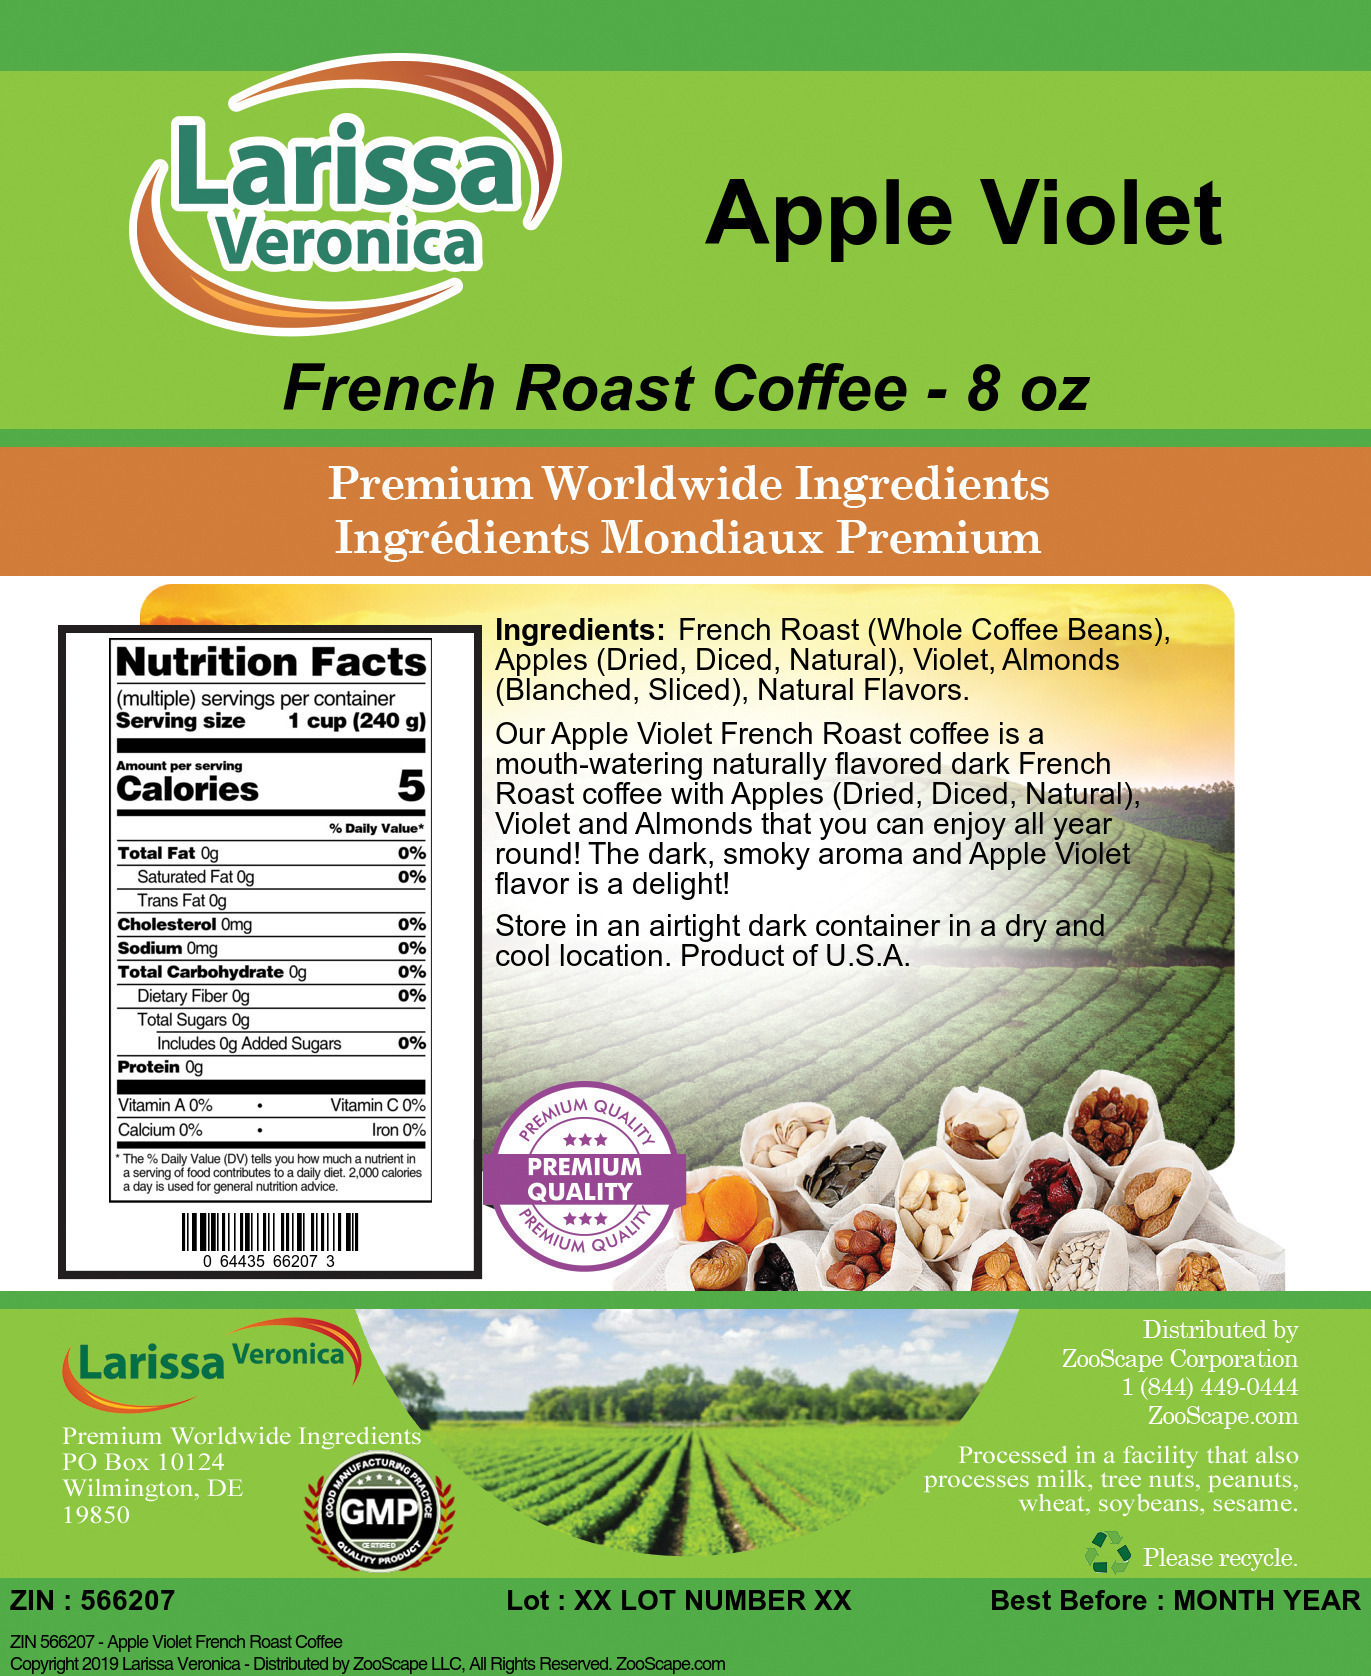 Apple Violet French Roast Coffee - Label